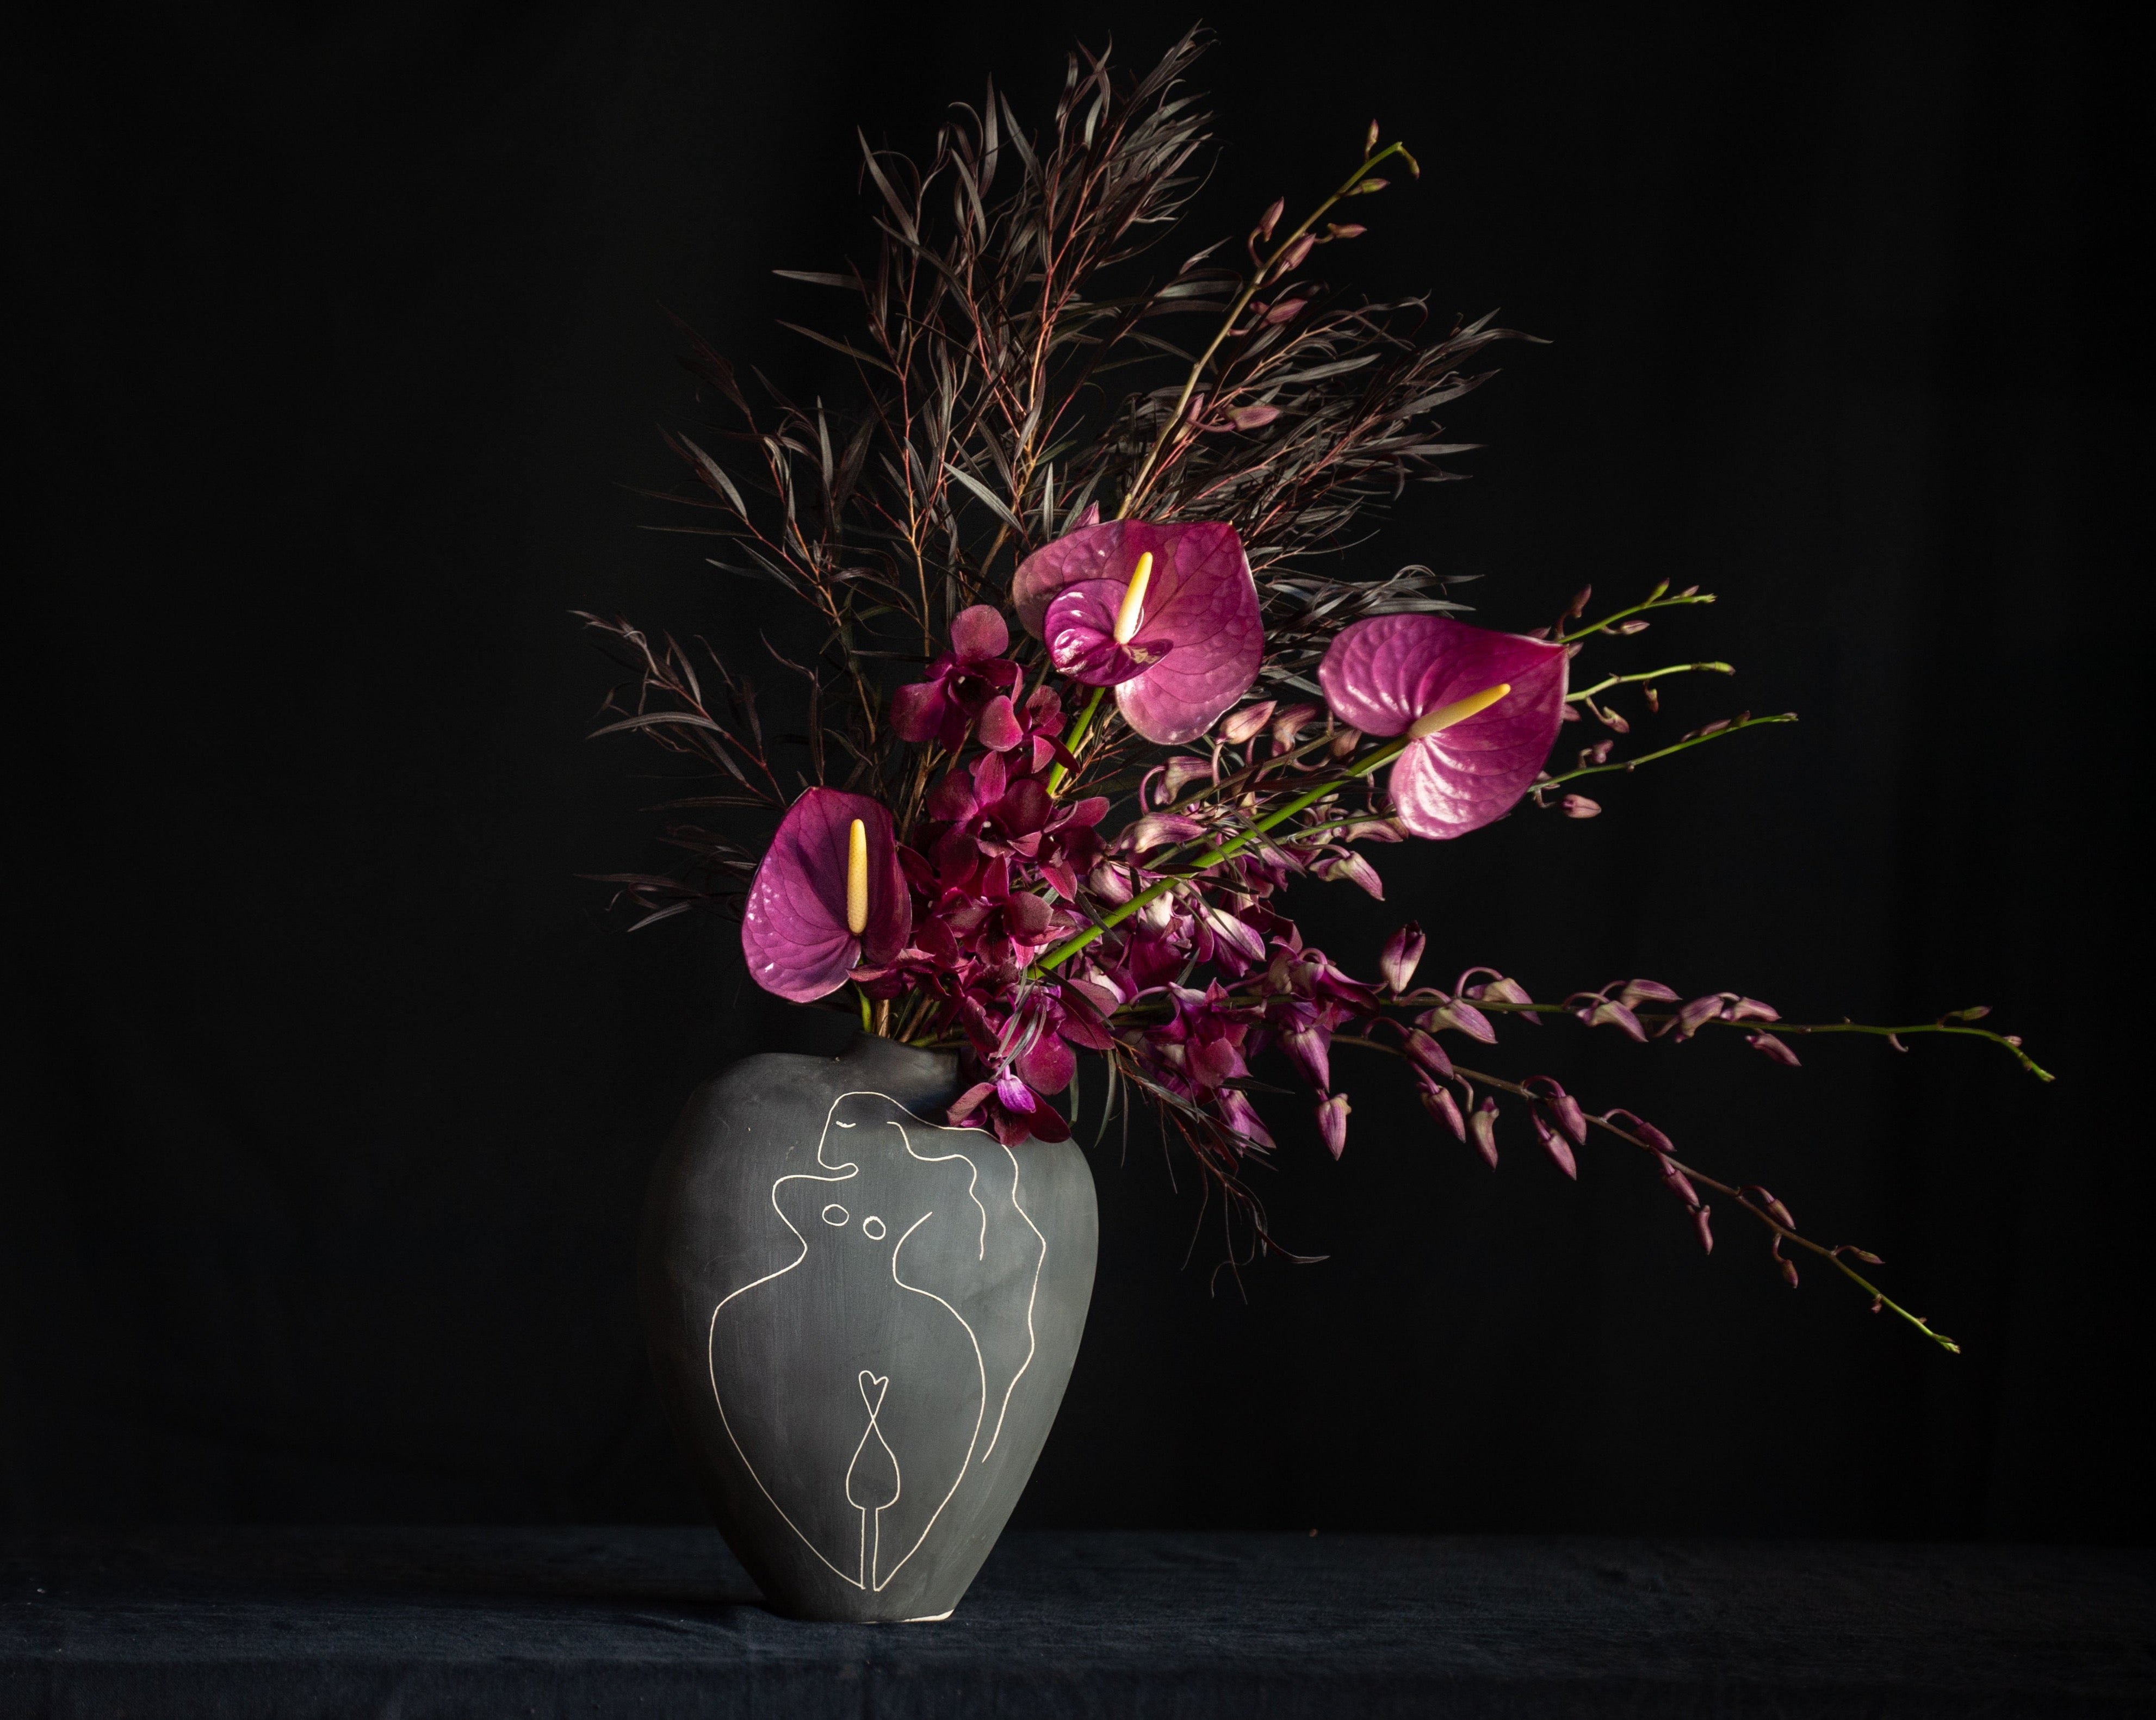 An artistic female vase filled with orchids and anthurium for Valentine's Day